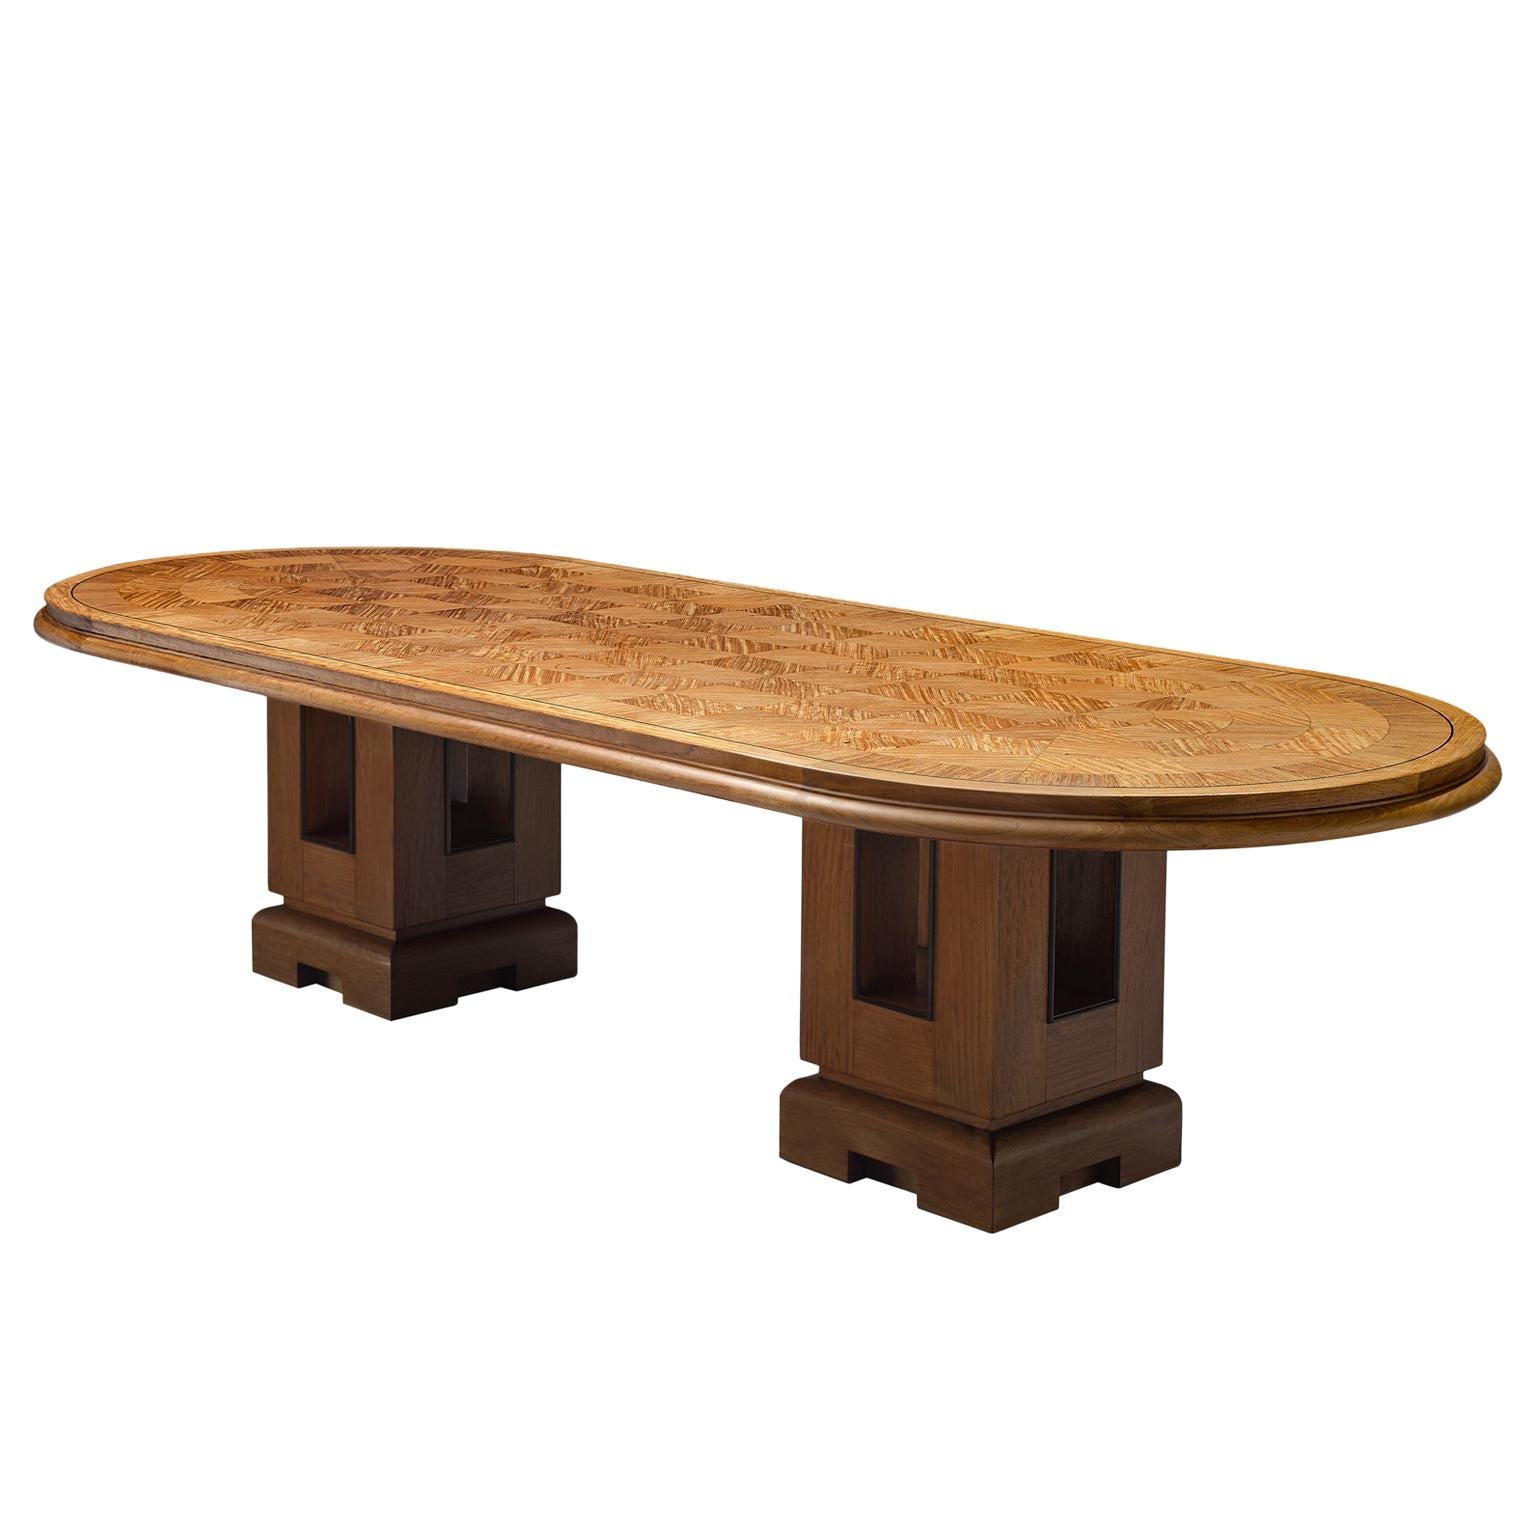 Alfred Chambon Large Oak Dining Table with Inlayed Table Top